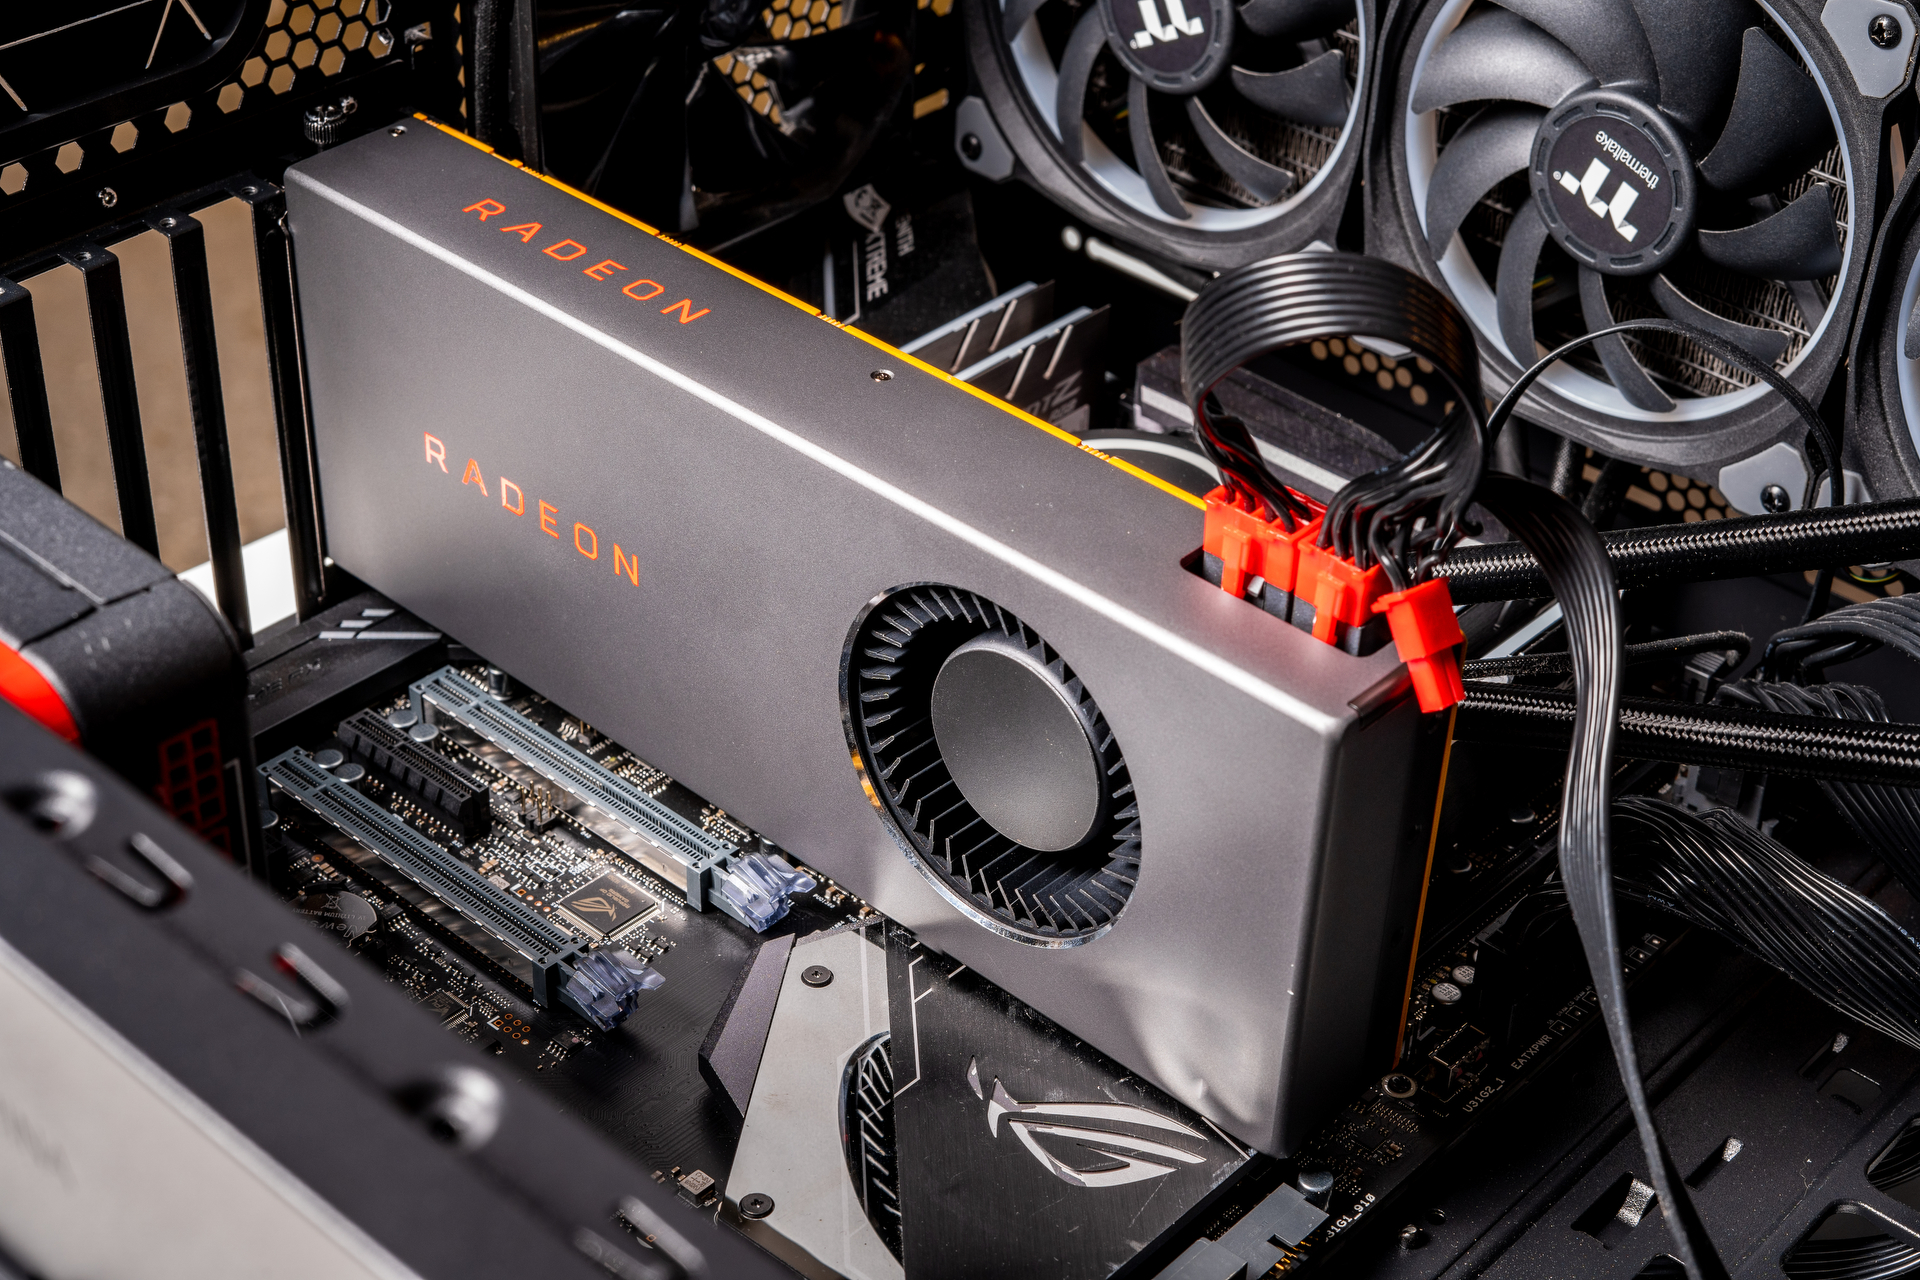 AMD Radeon RX 5700 XT vs. RX 5700: Which Is the Better Value